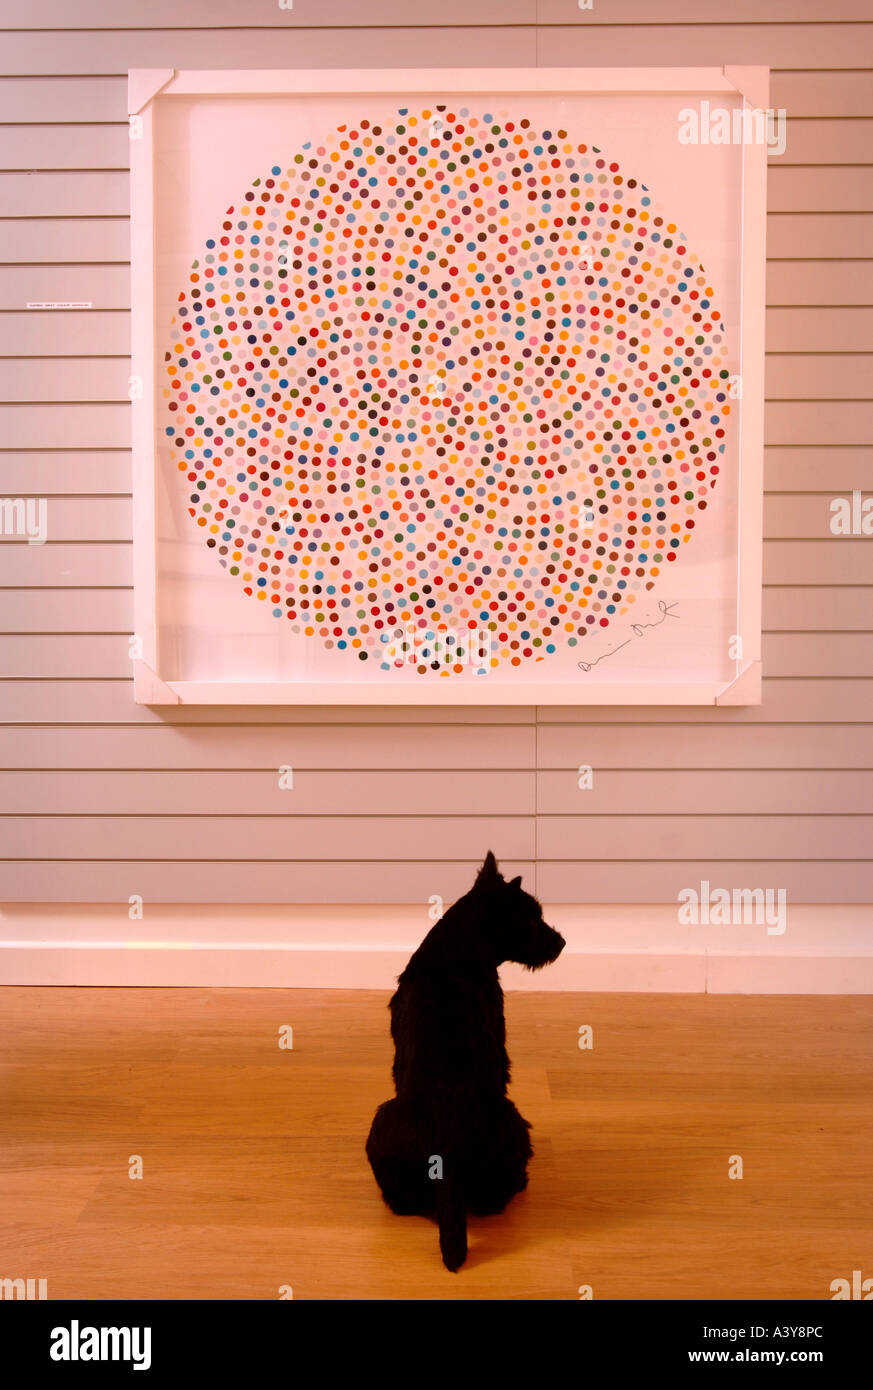 A BLACK SCOTTISH TERRIER APPEARS TO BE VIEWING A DAMIEN HIRST DOT PAINTING TITLED VALIUM IN AN EYESTORM ART GALLERY Stock Photo